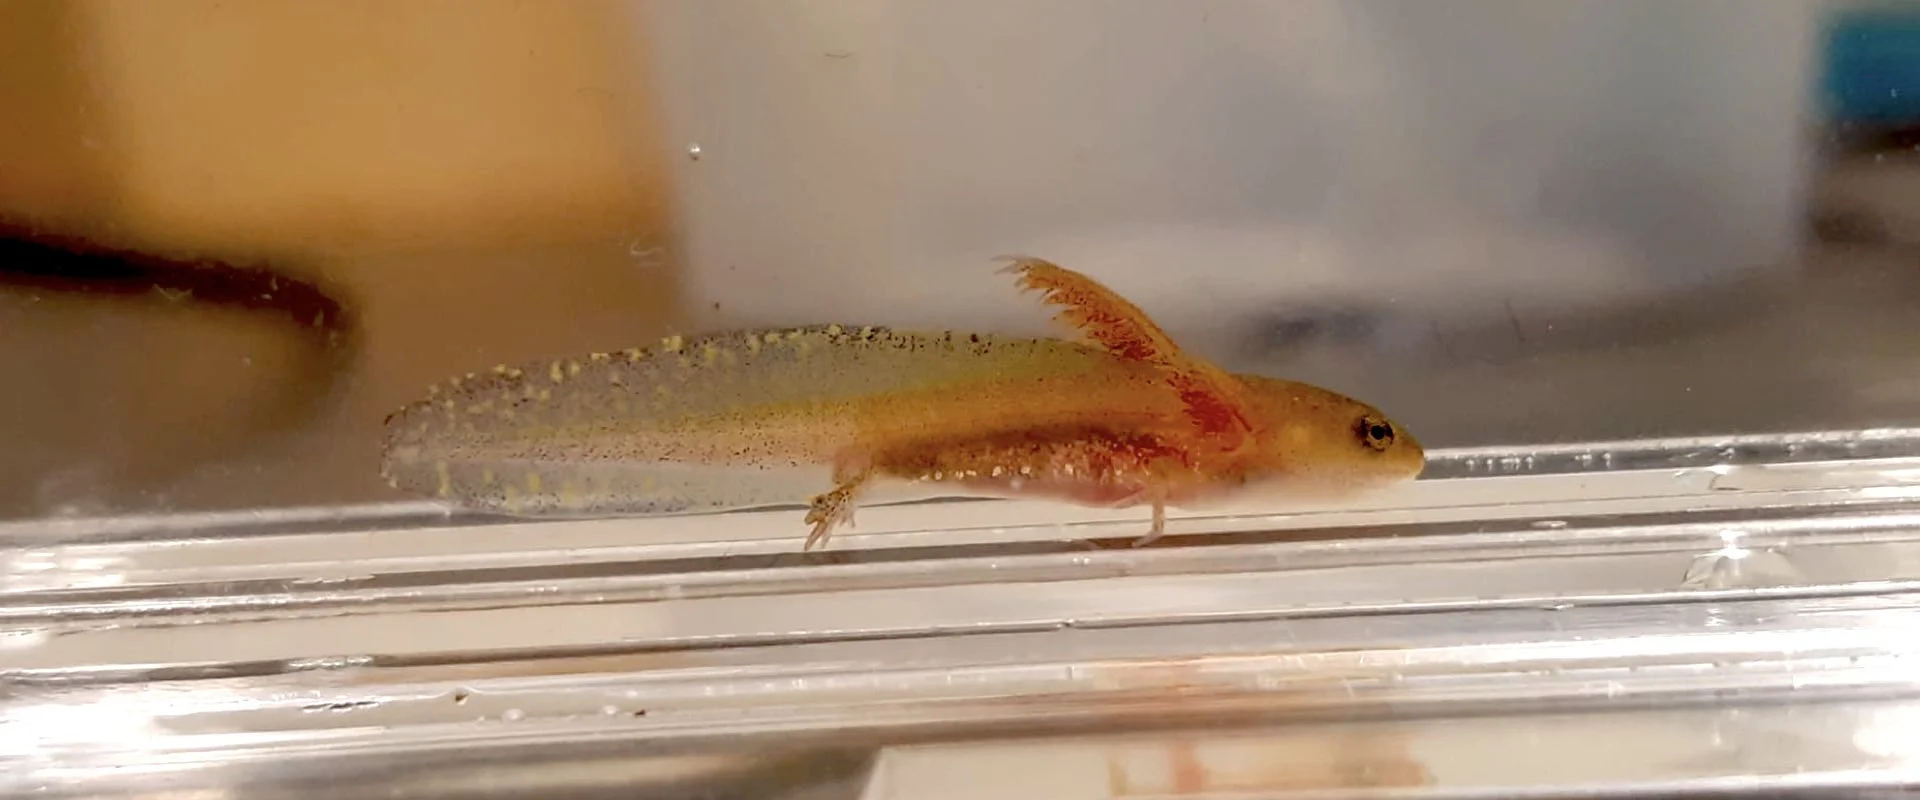 A yellow larval salamander with long red frilly external gills underwater in a clear water tank